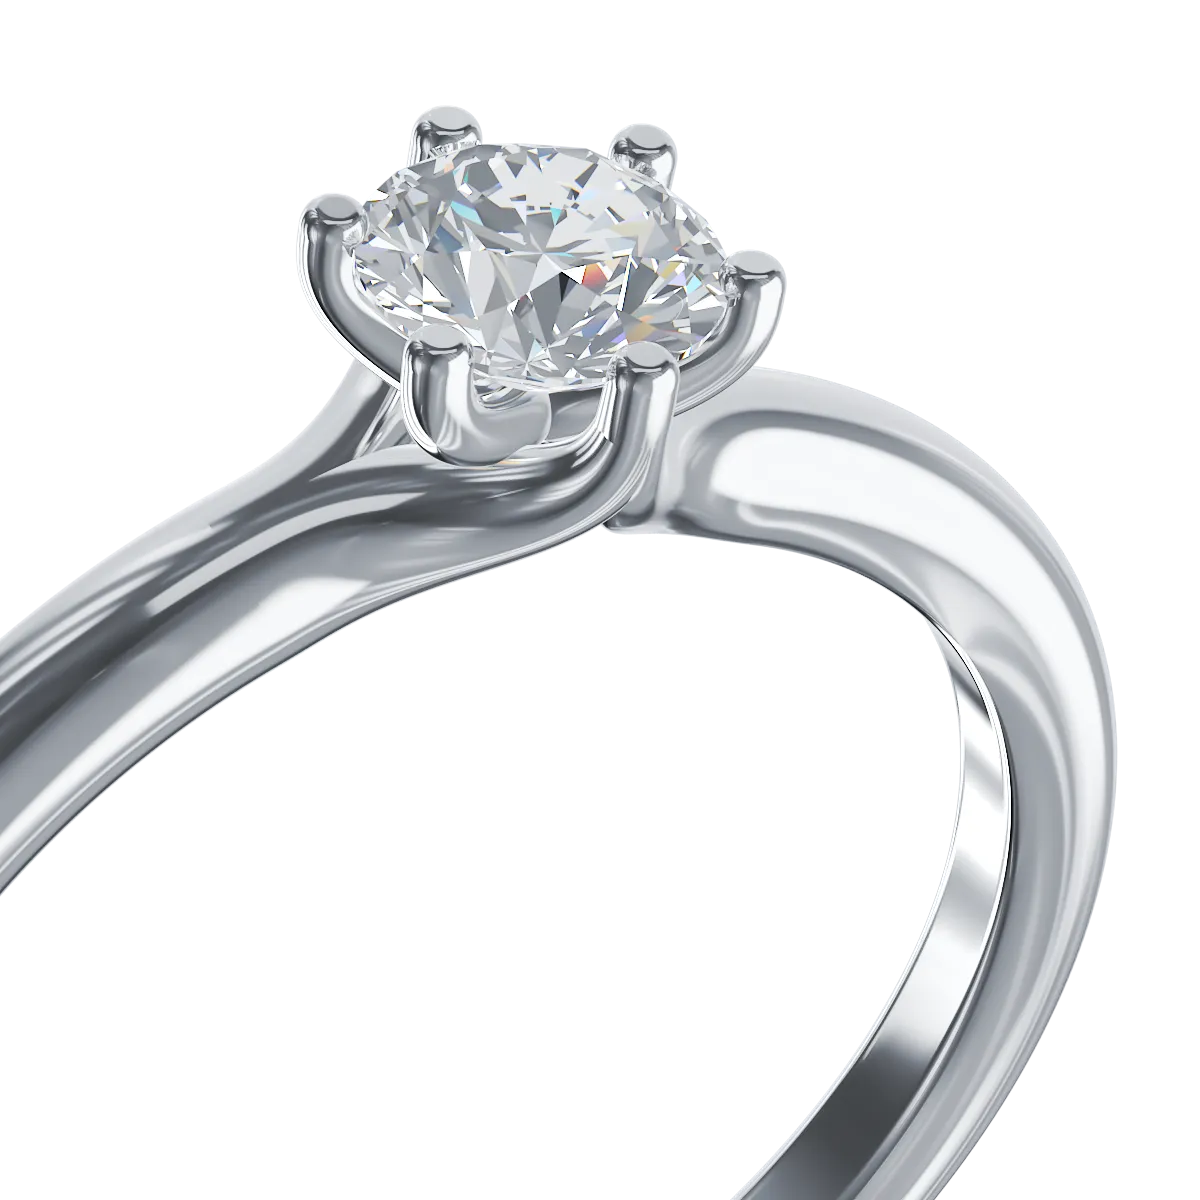 Platinum engagement ring with a 0.3ct solitaire diamond